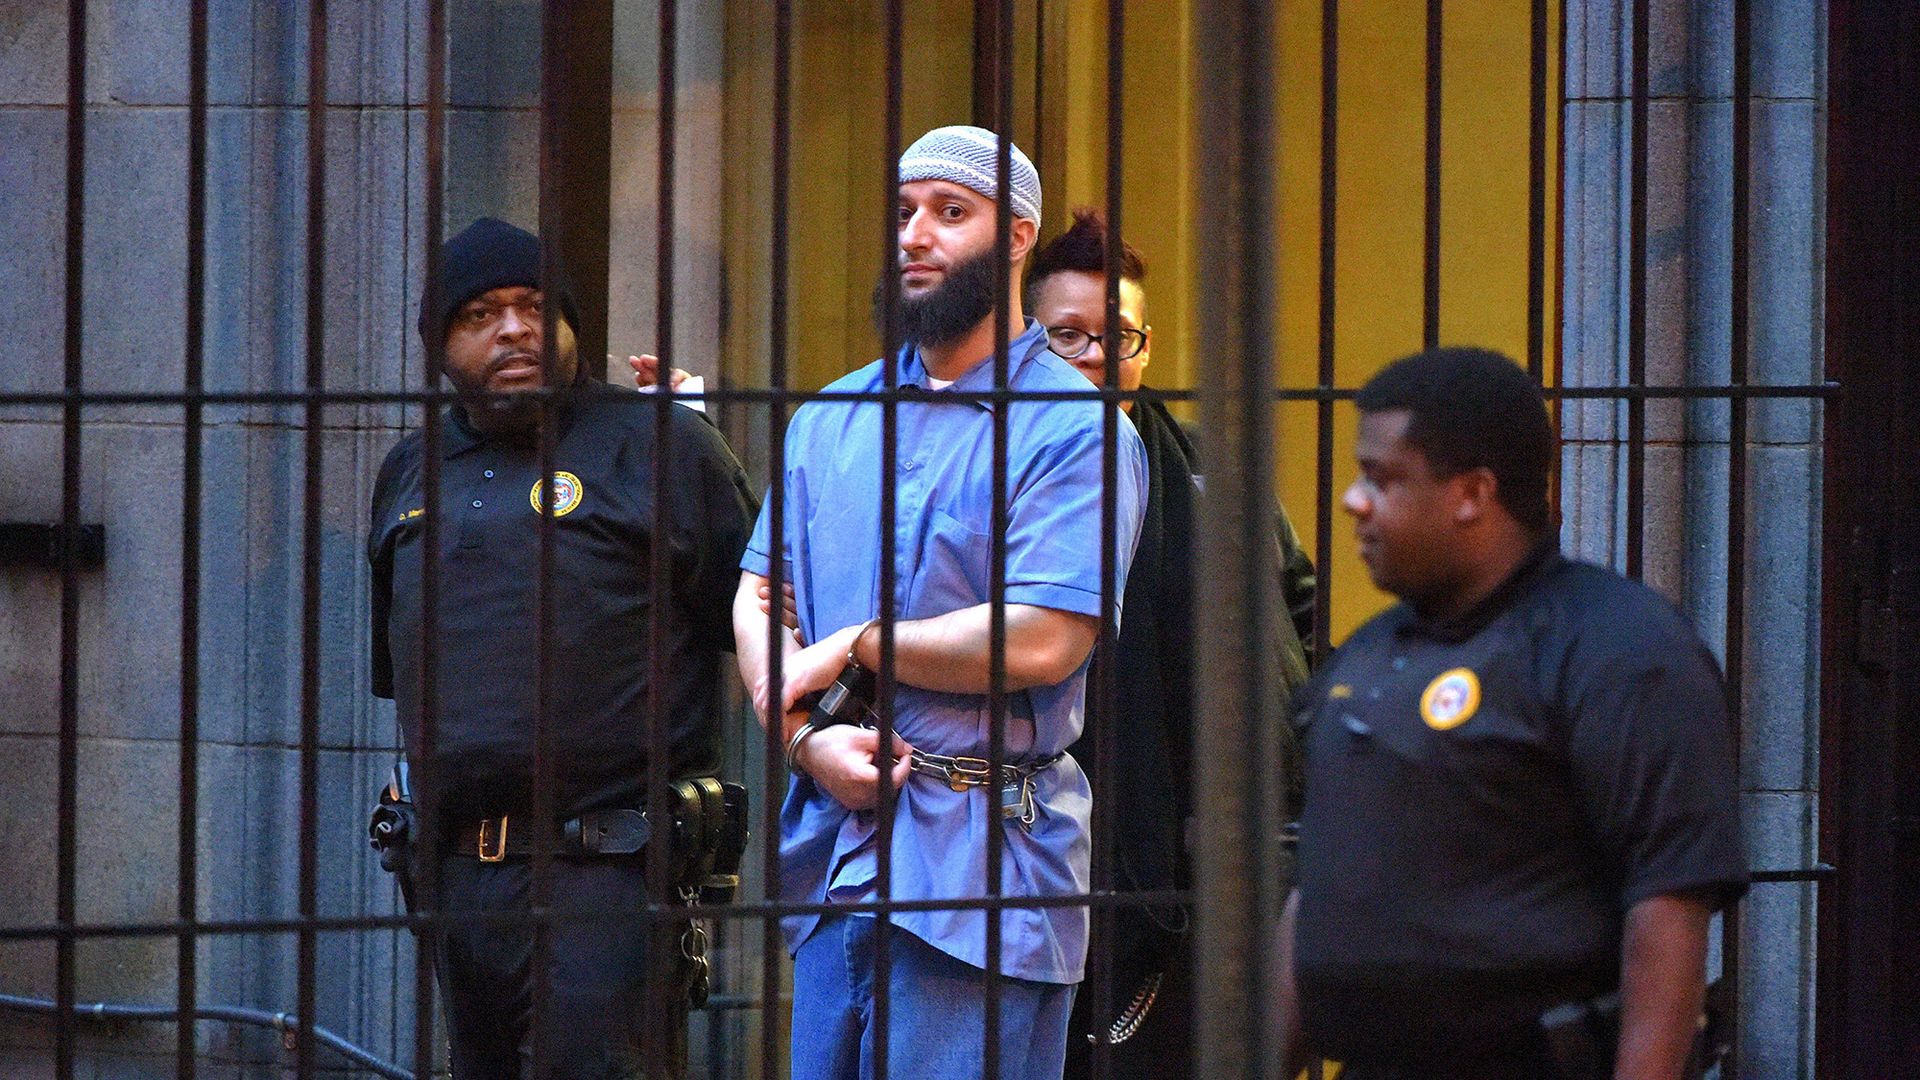 Photo of Adnan Syed in a blue prison jumpsuit being escorted behind bars by guards